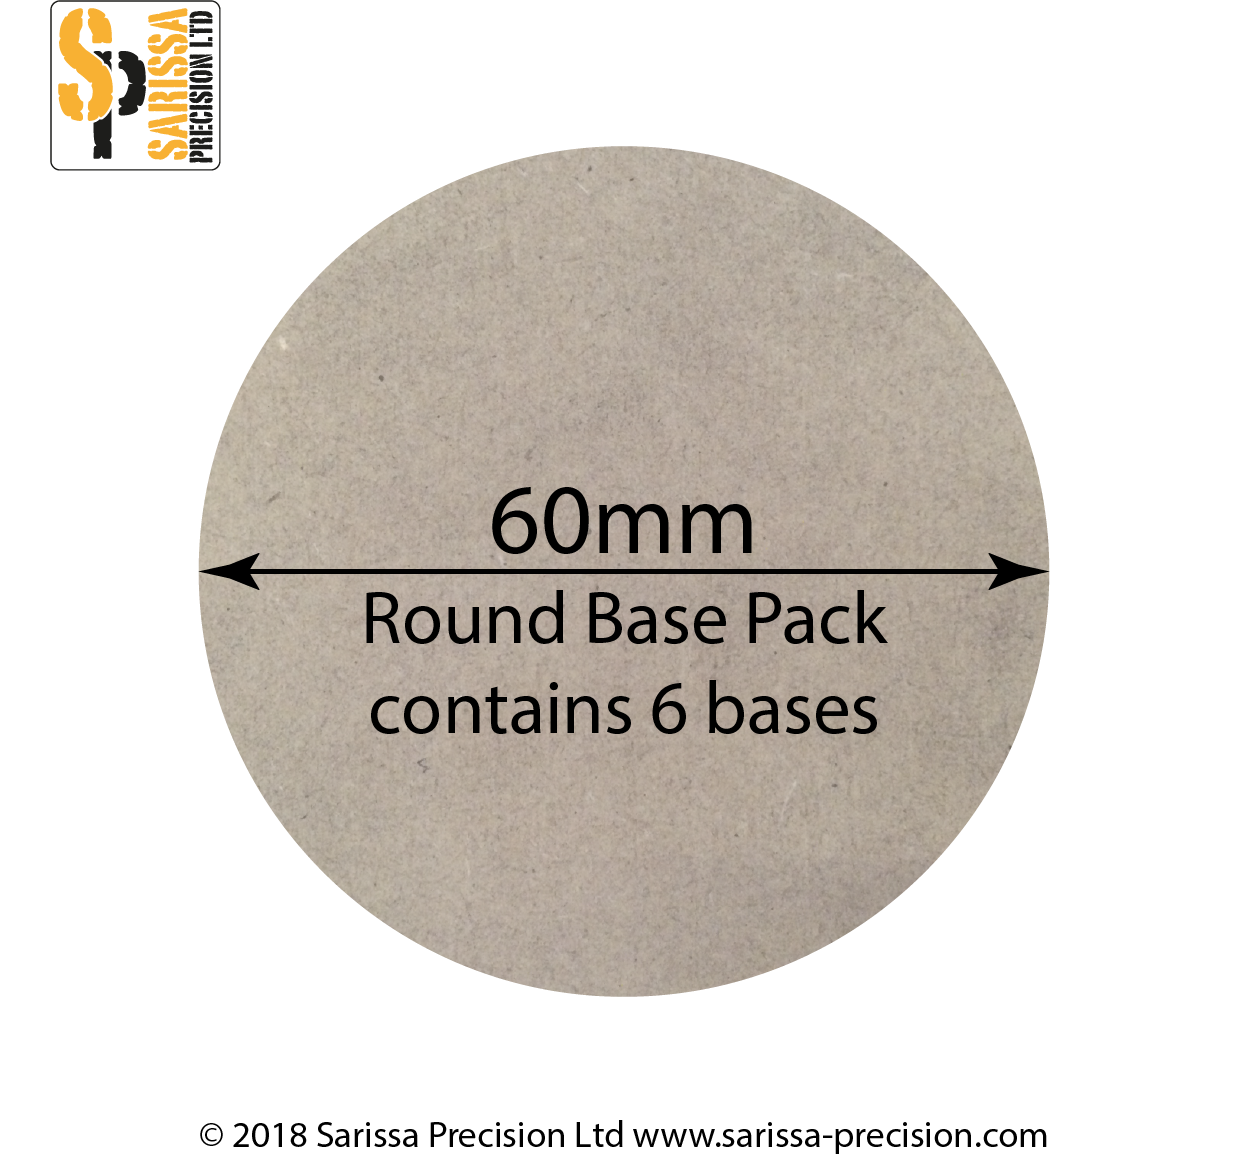 60mm Round Base Pack